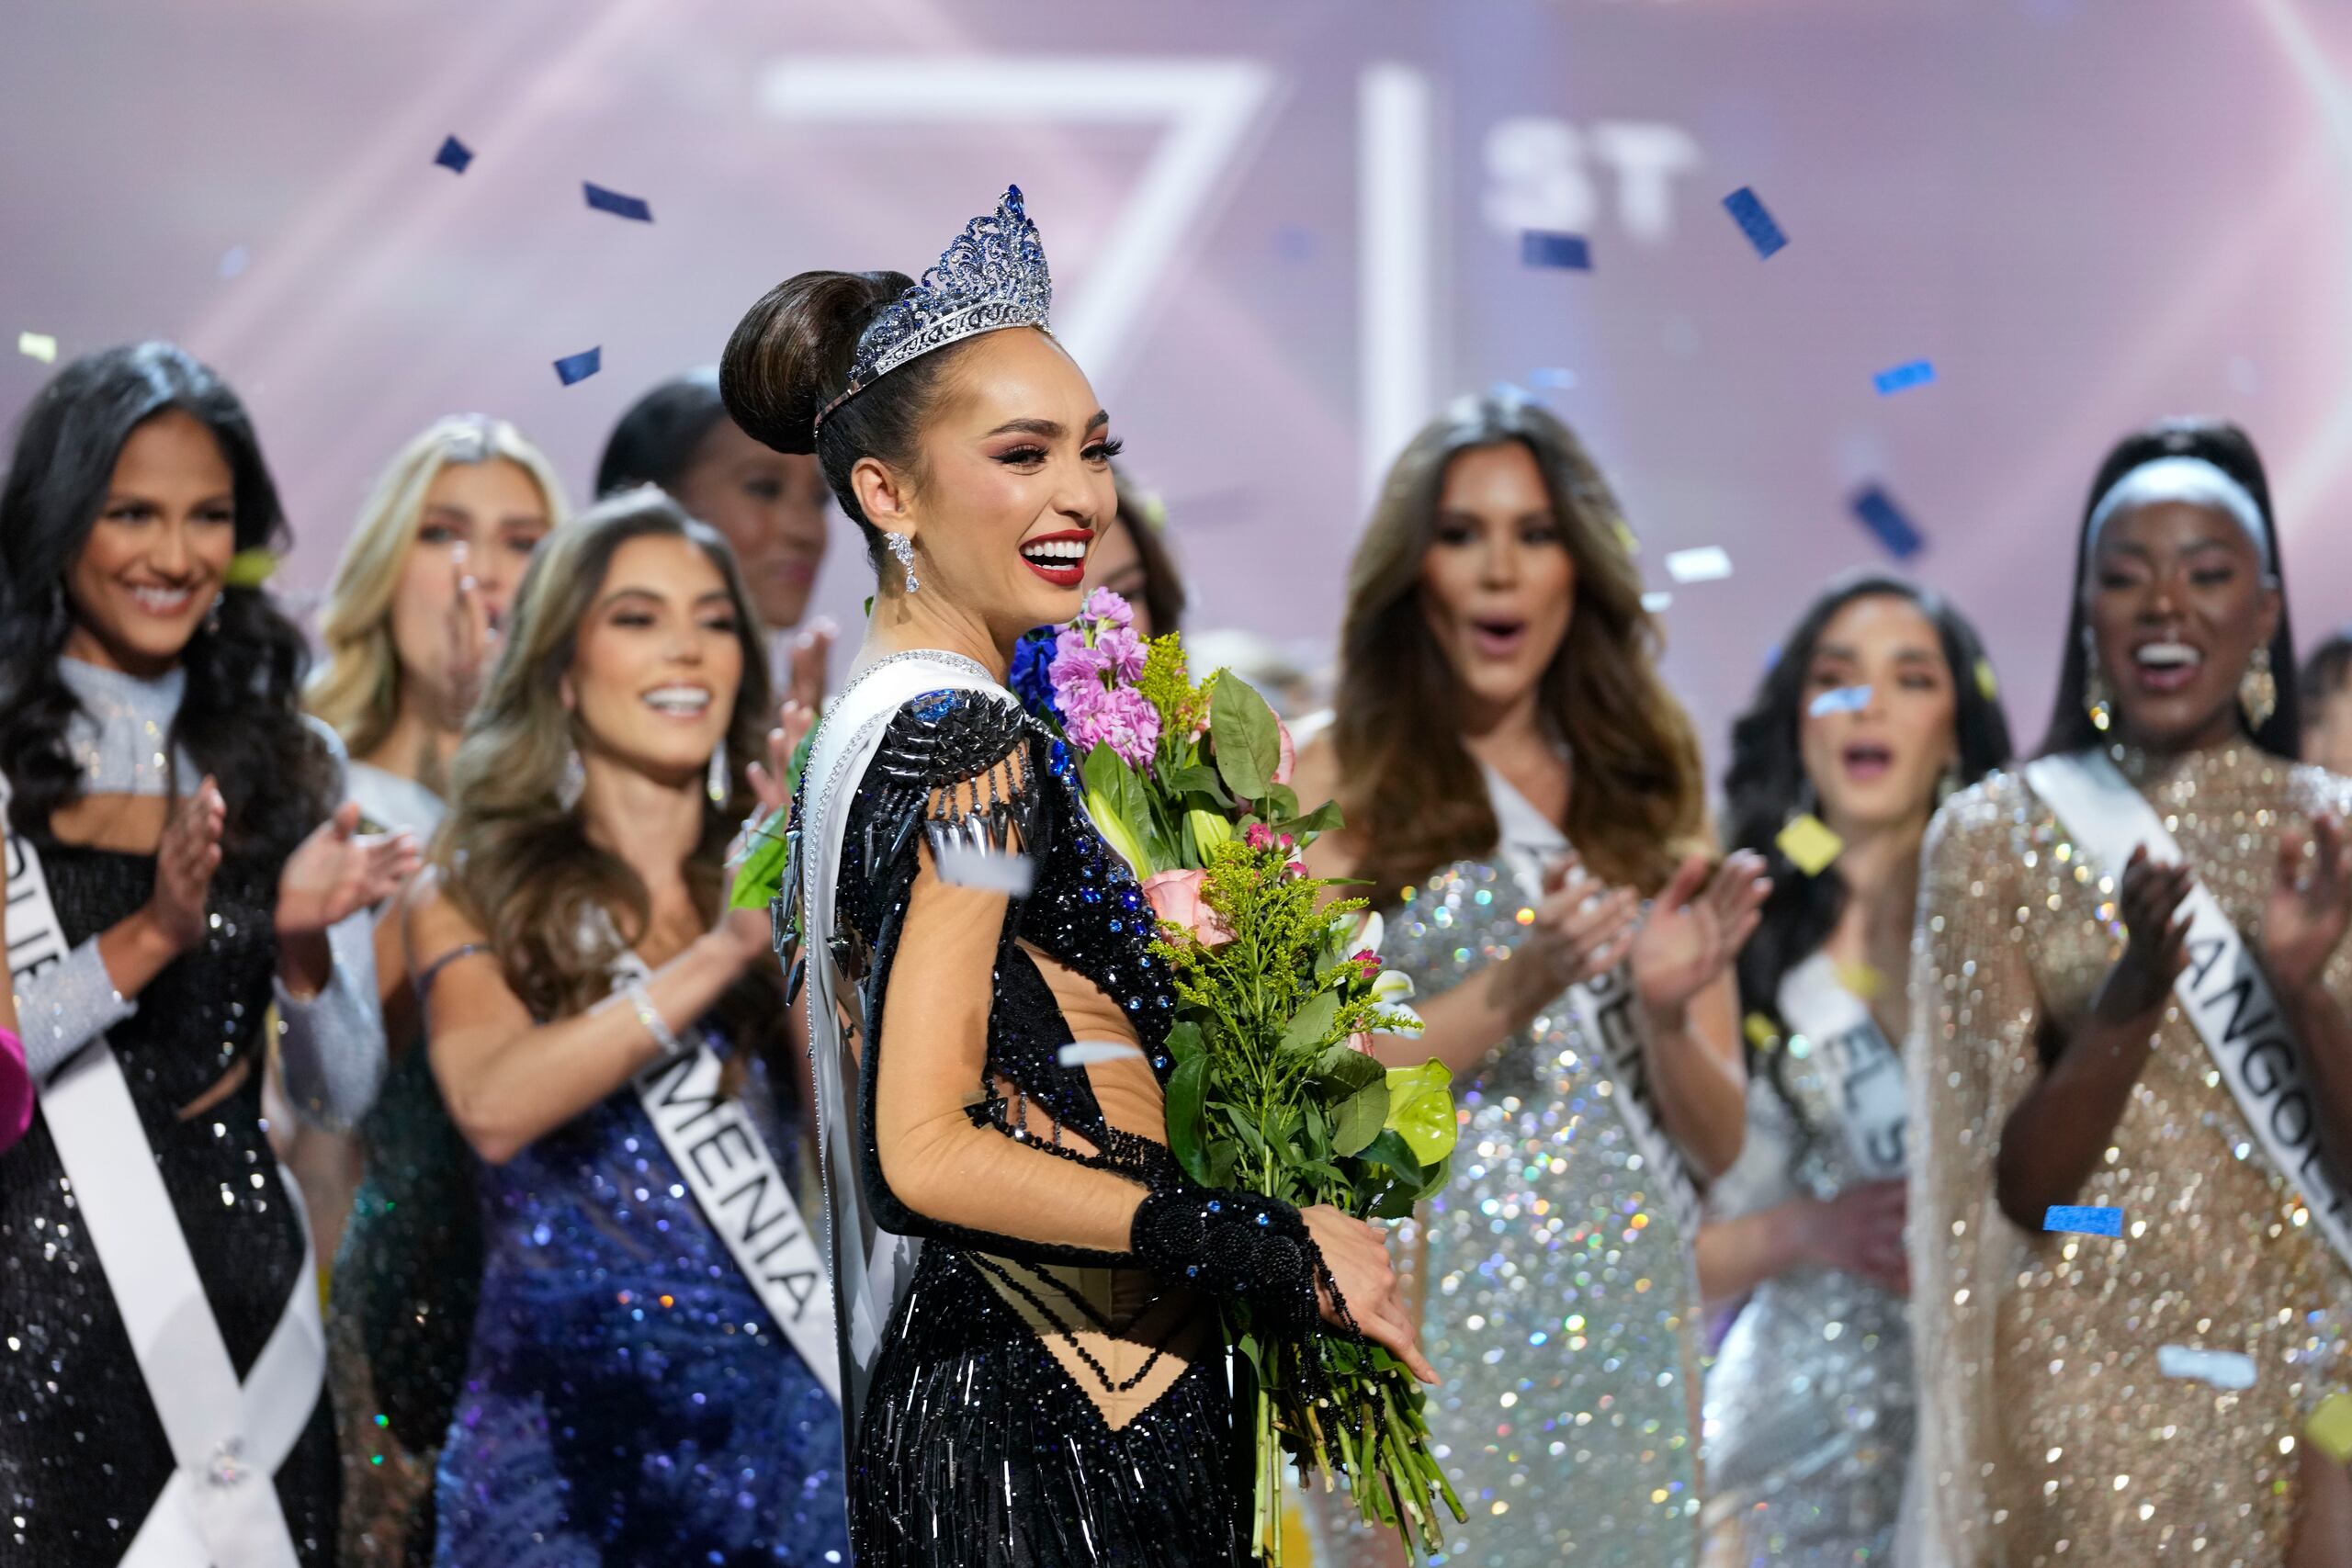 Miss USA R'Bonney Gabriel reacts after being crowned Miss Universe at the 71st Miss Universe pageant, in New Orleans on Saturday, Jan. 14, 2023. (AP Photo/Gerald Herbert)